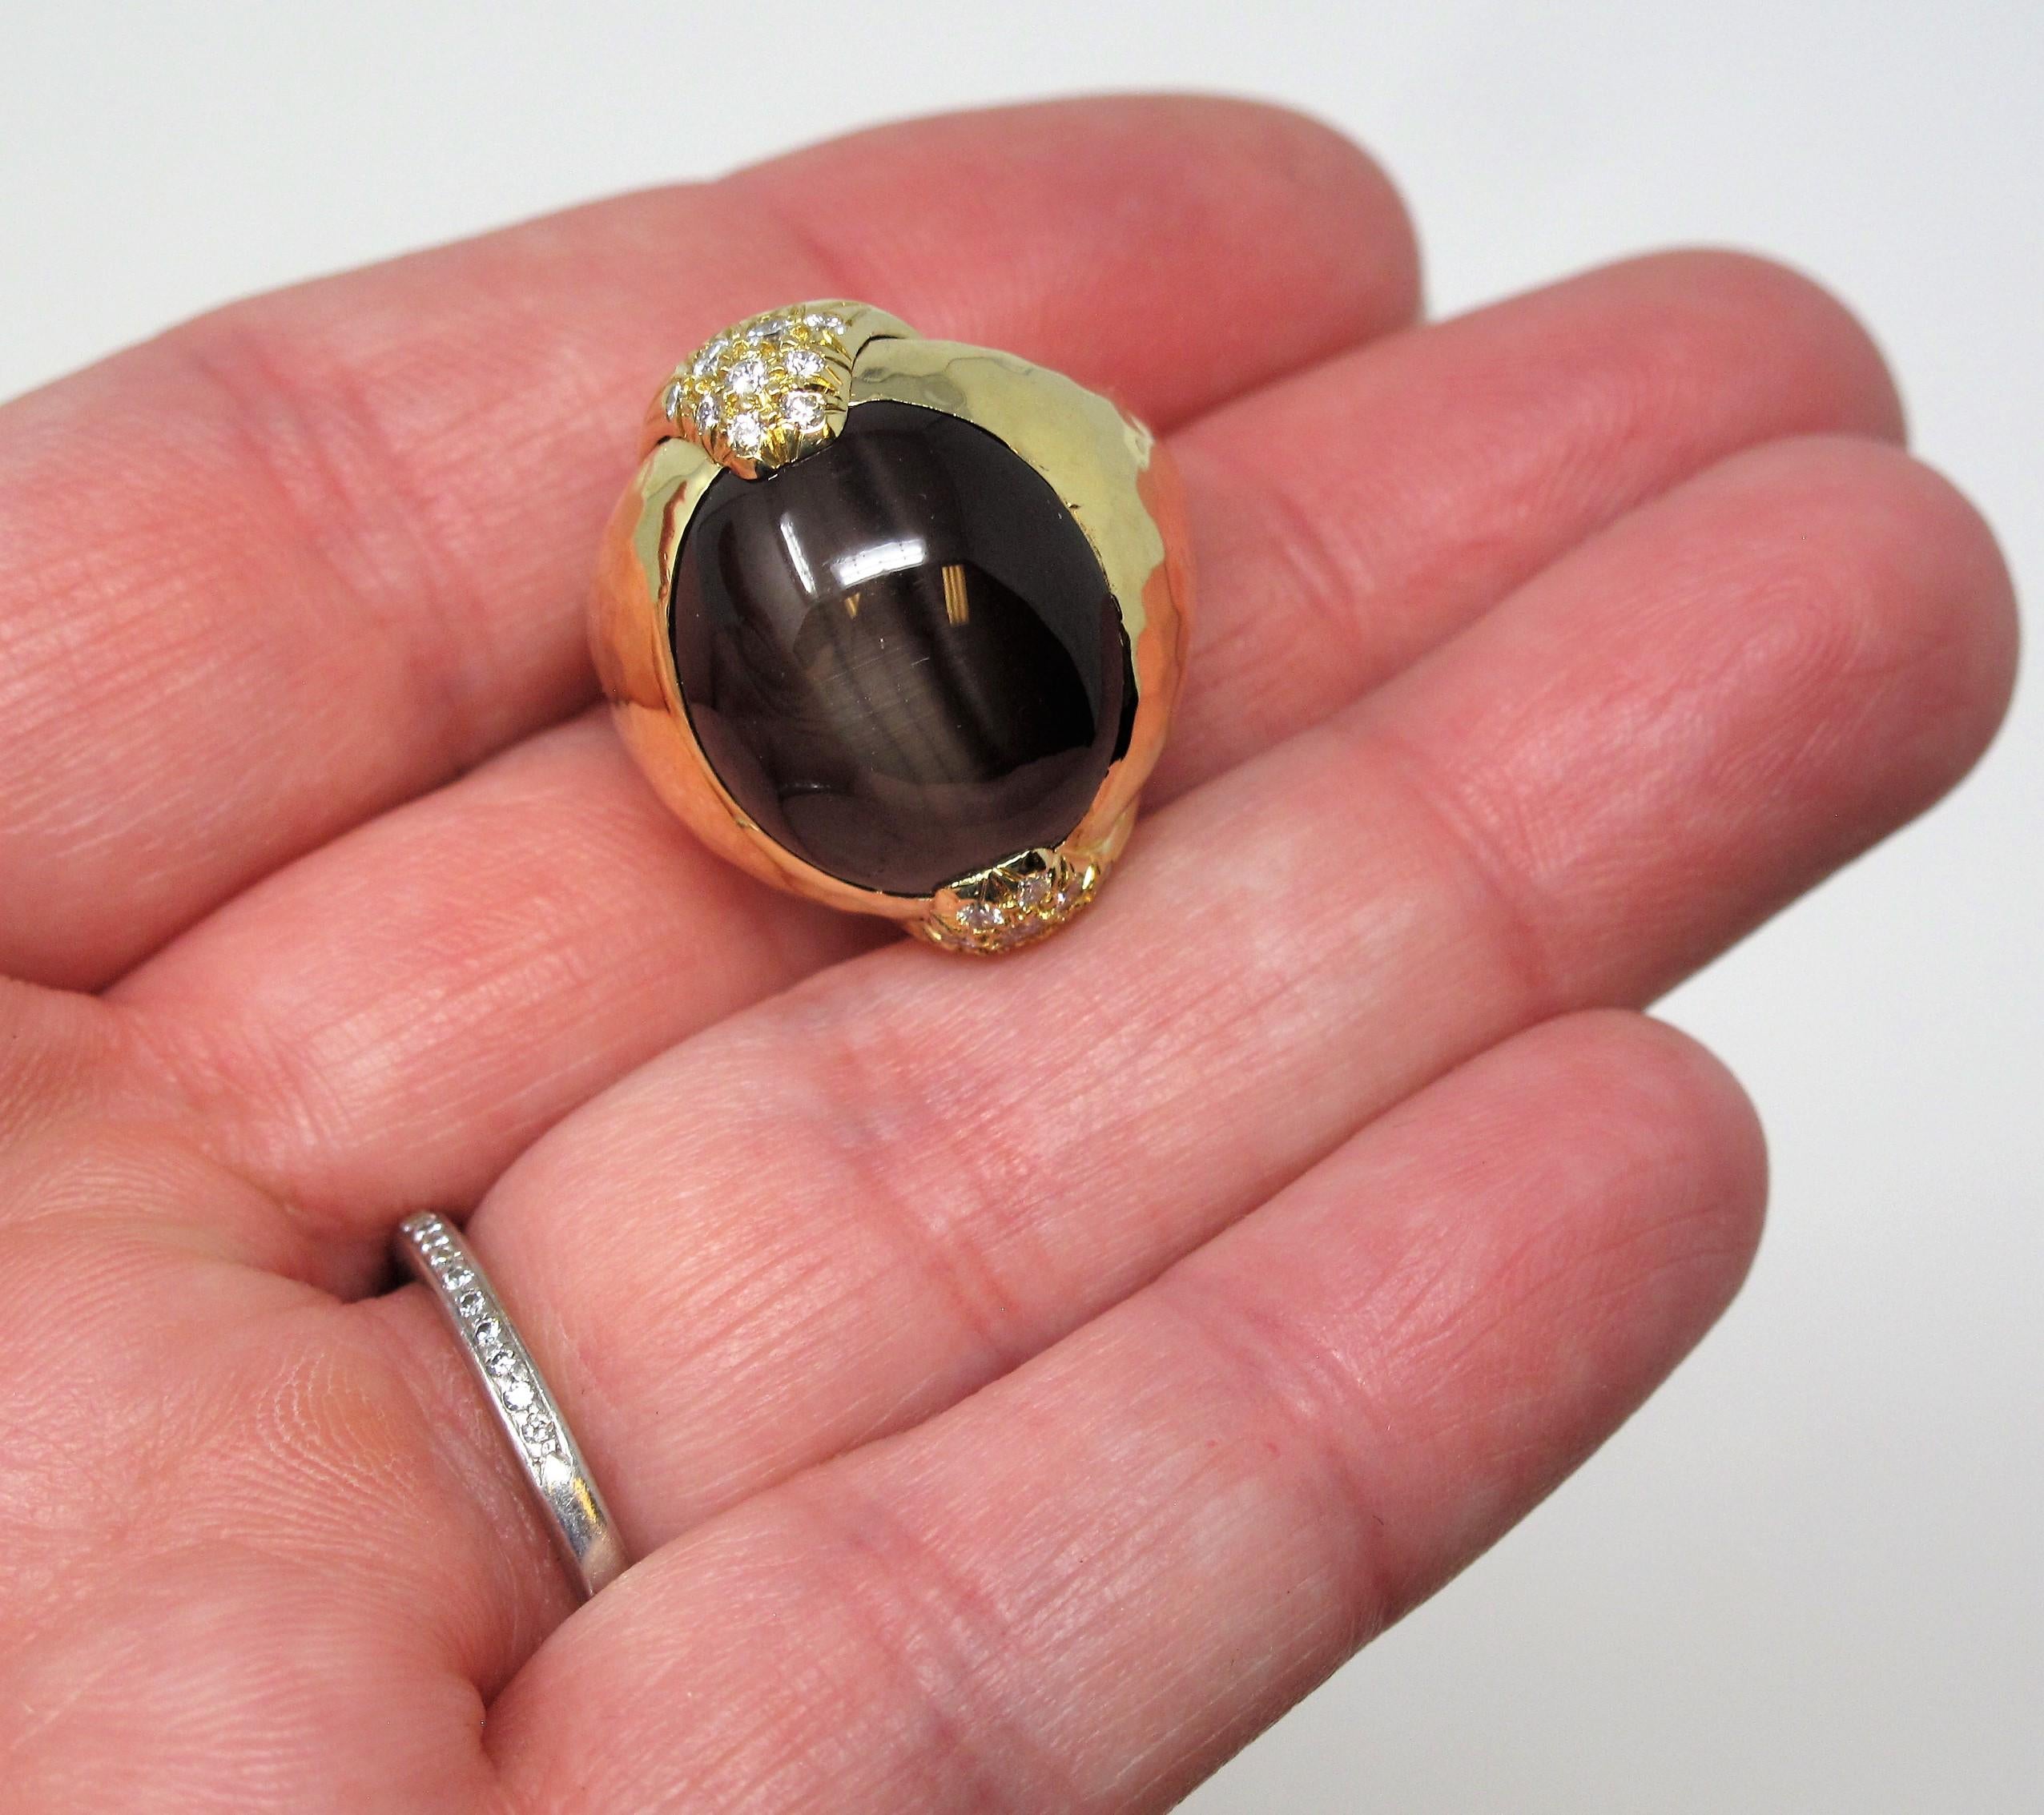 Henry Dunay Cabochon Cat's Eye Sillimanite and Diamond Dome Ring 18 Karat In Good Condition For Sale In Scottsdale, AZ